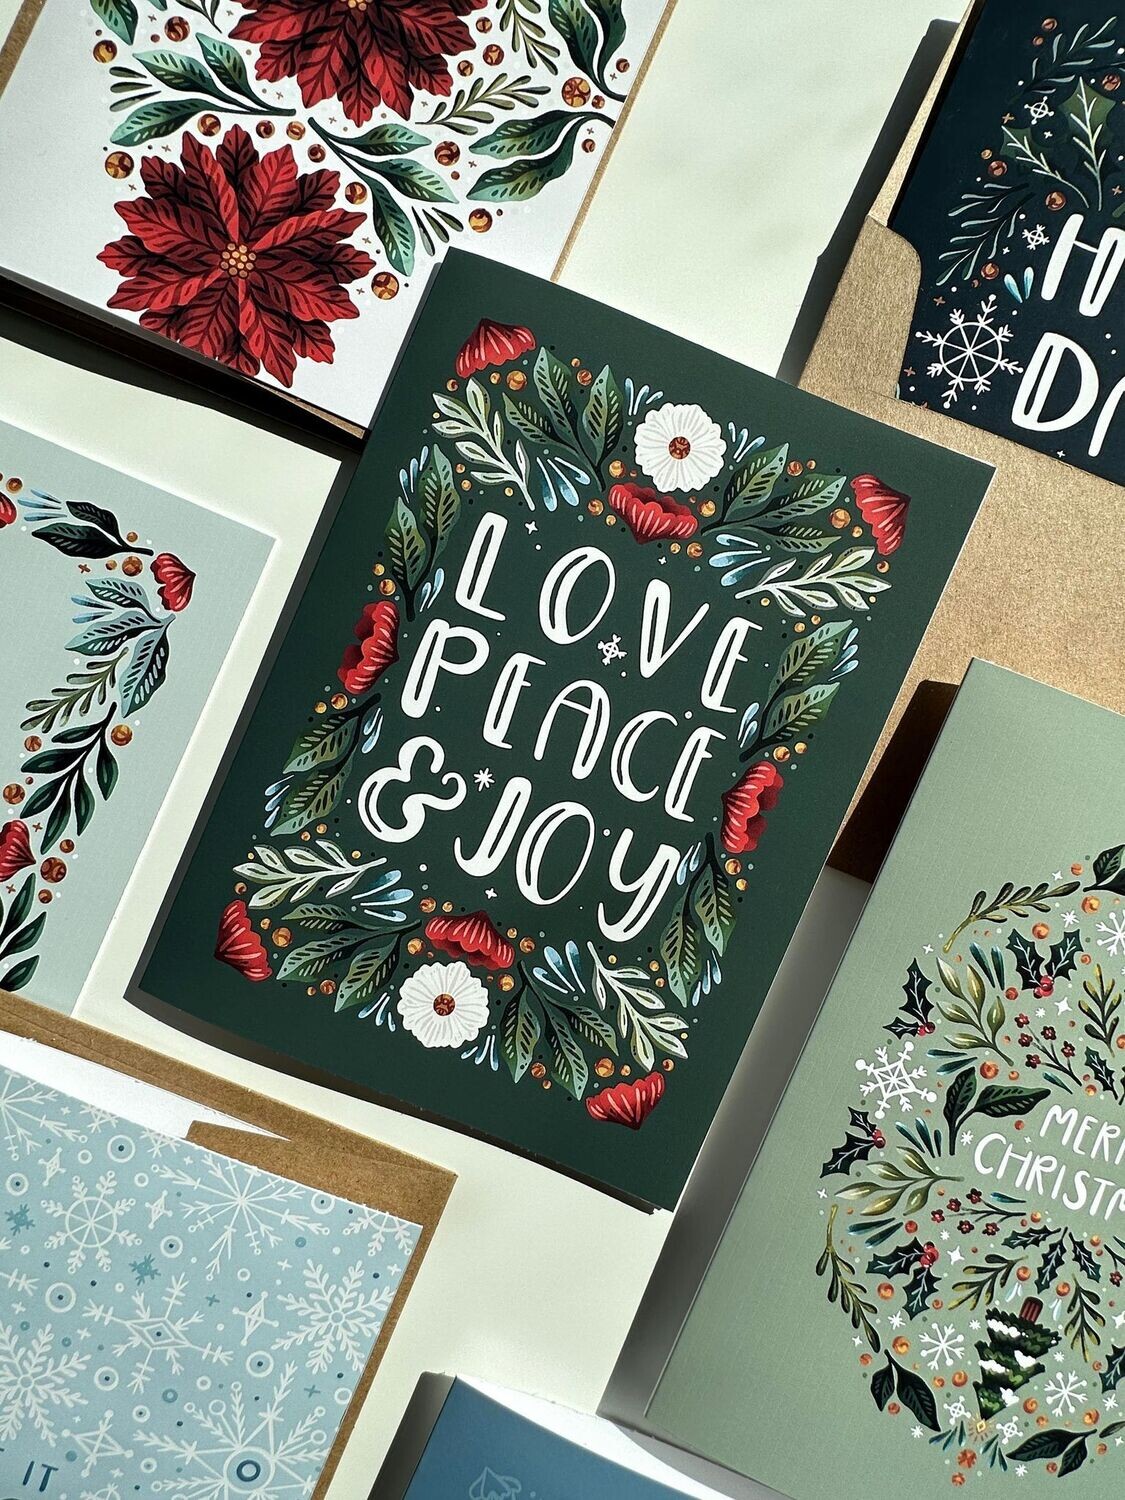 Assortment of 10 Holiday Cards